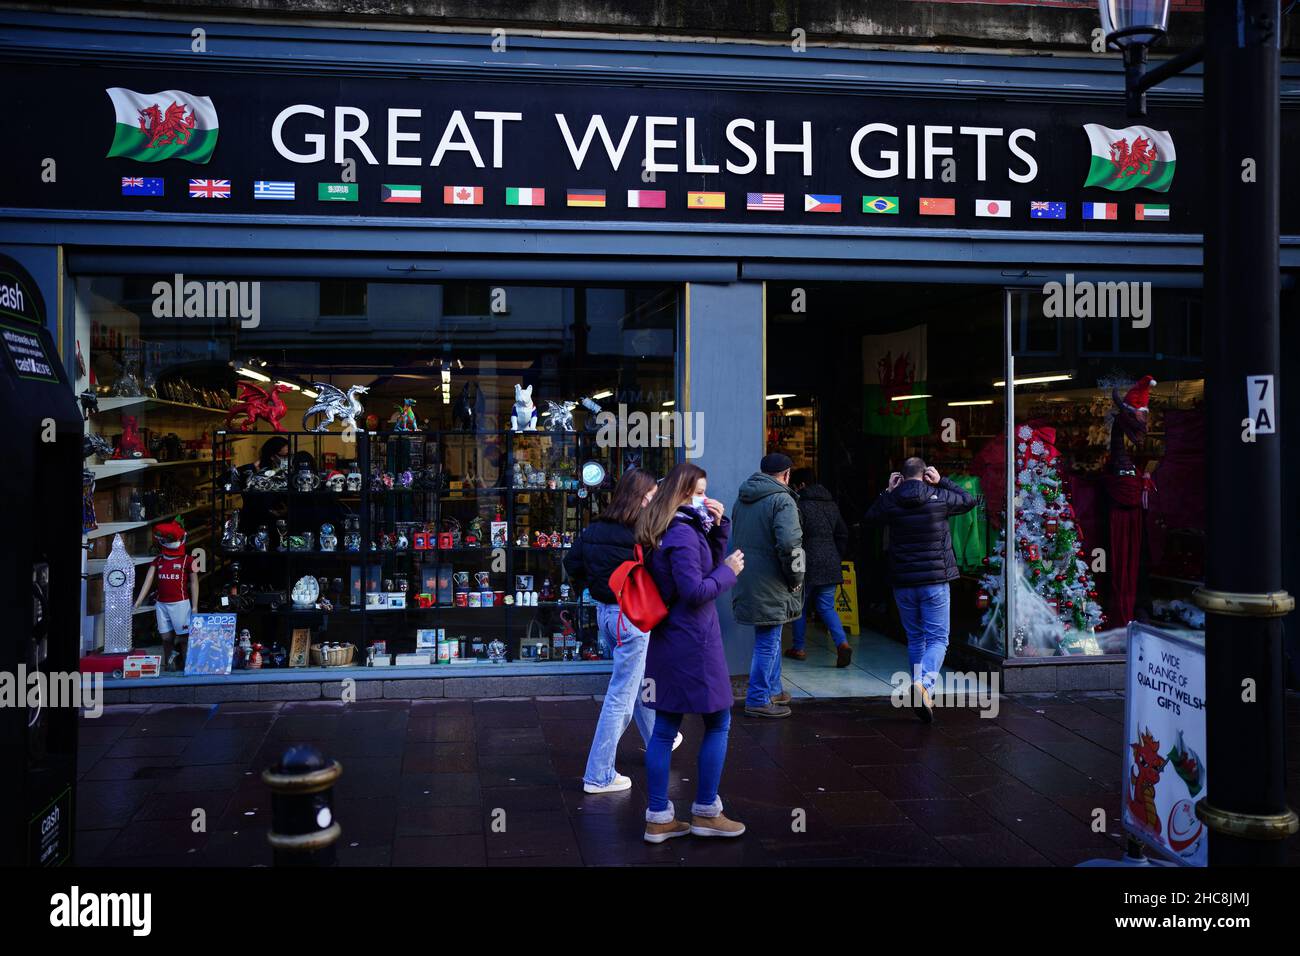 People adjust face masks as they enter the Great Welsh Gifts store in Cardiff, Wales, as new Covid-19 rules come into force. Groups of no more than six people will be allowed to meet in pubs, cinemas and restaurants in Wales, with two-metre social distancing being required in public premises and offices. Picture date: Sunday December 26, 2021. Stock Photo